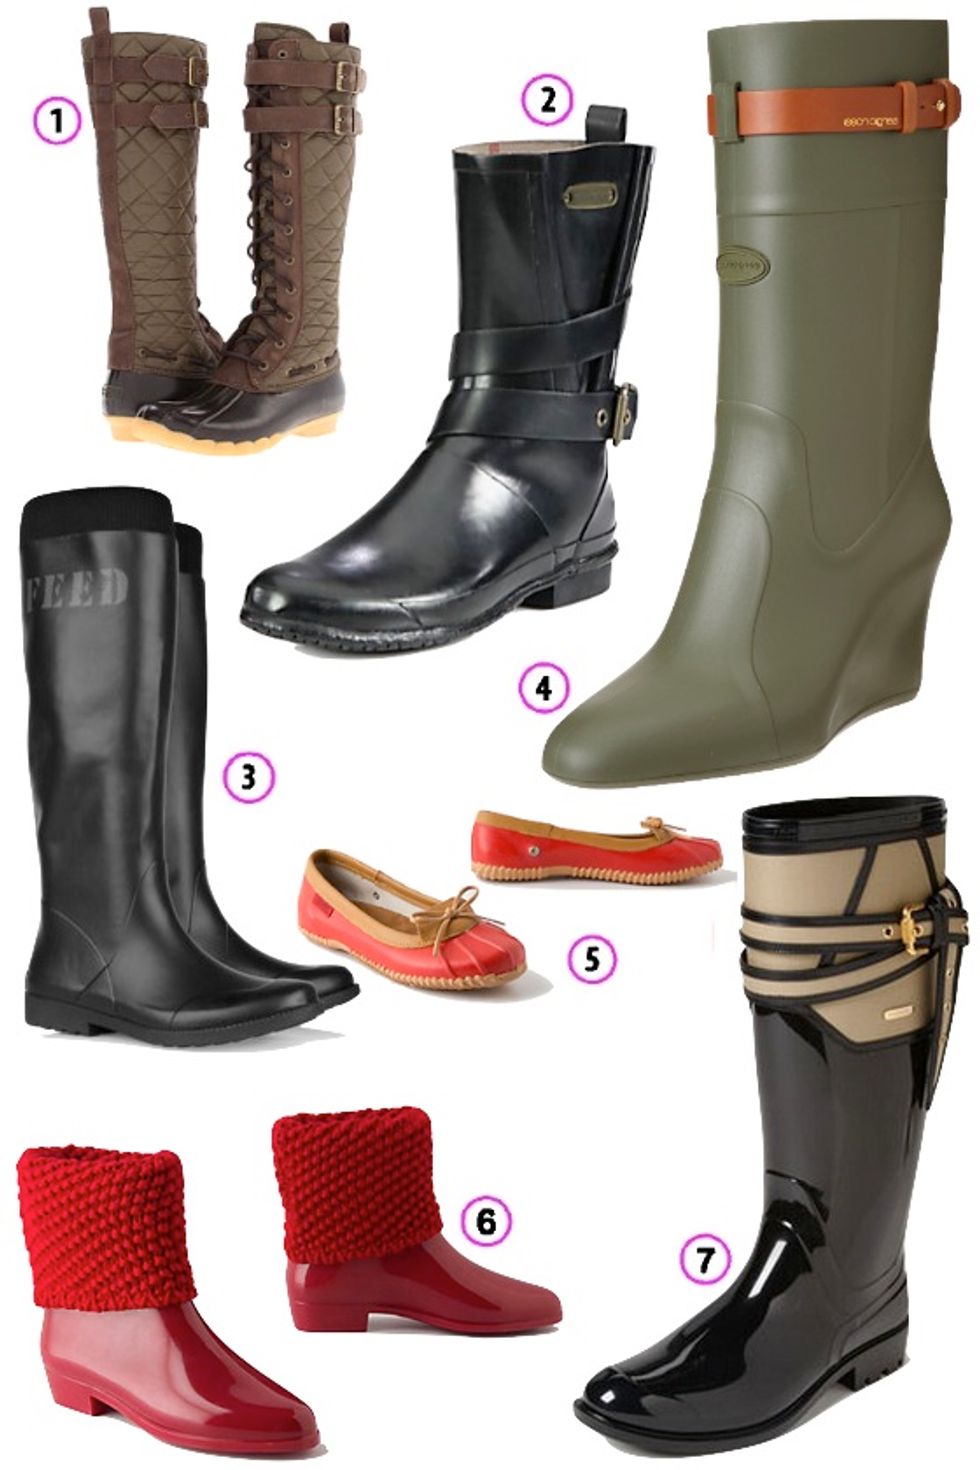 Look of the Week: Stylish Rain Boots for Her